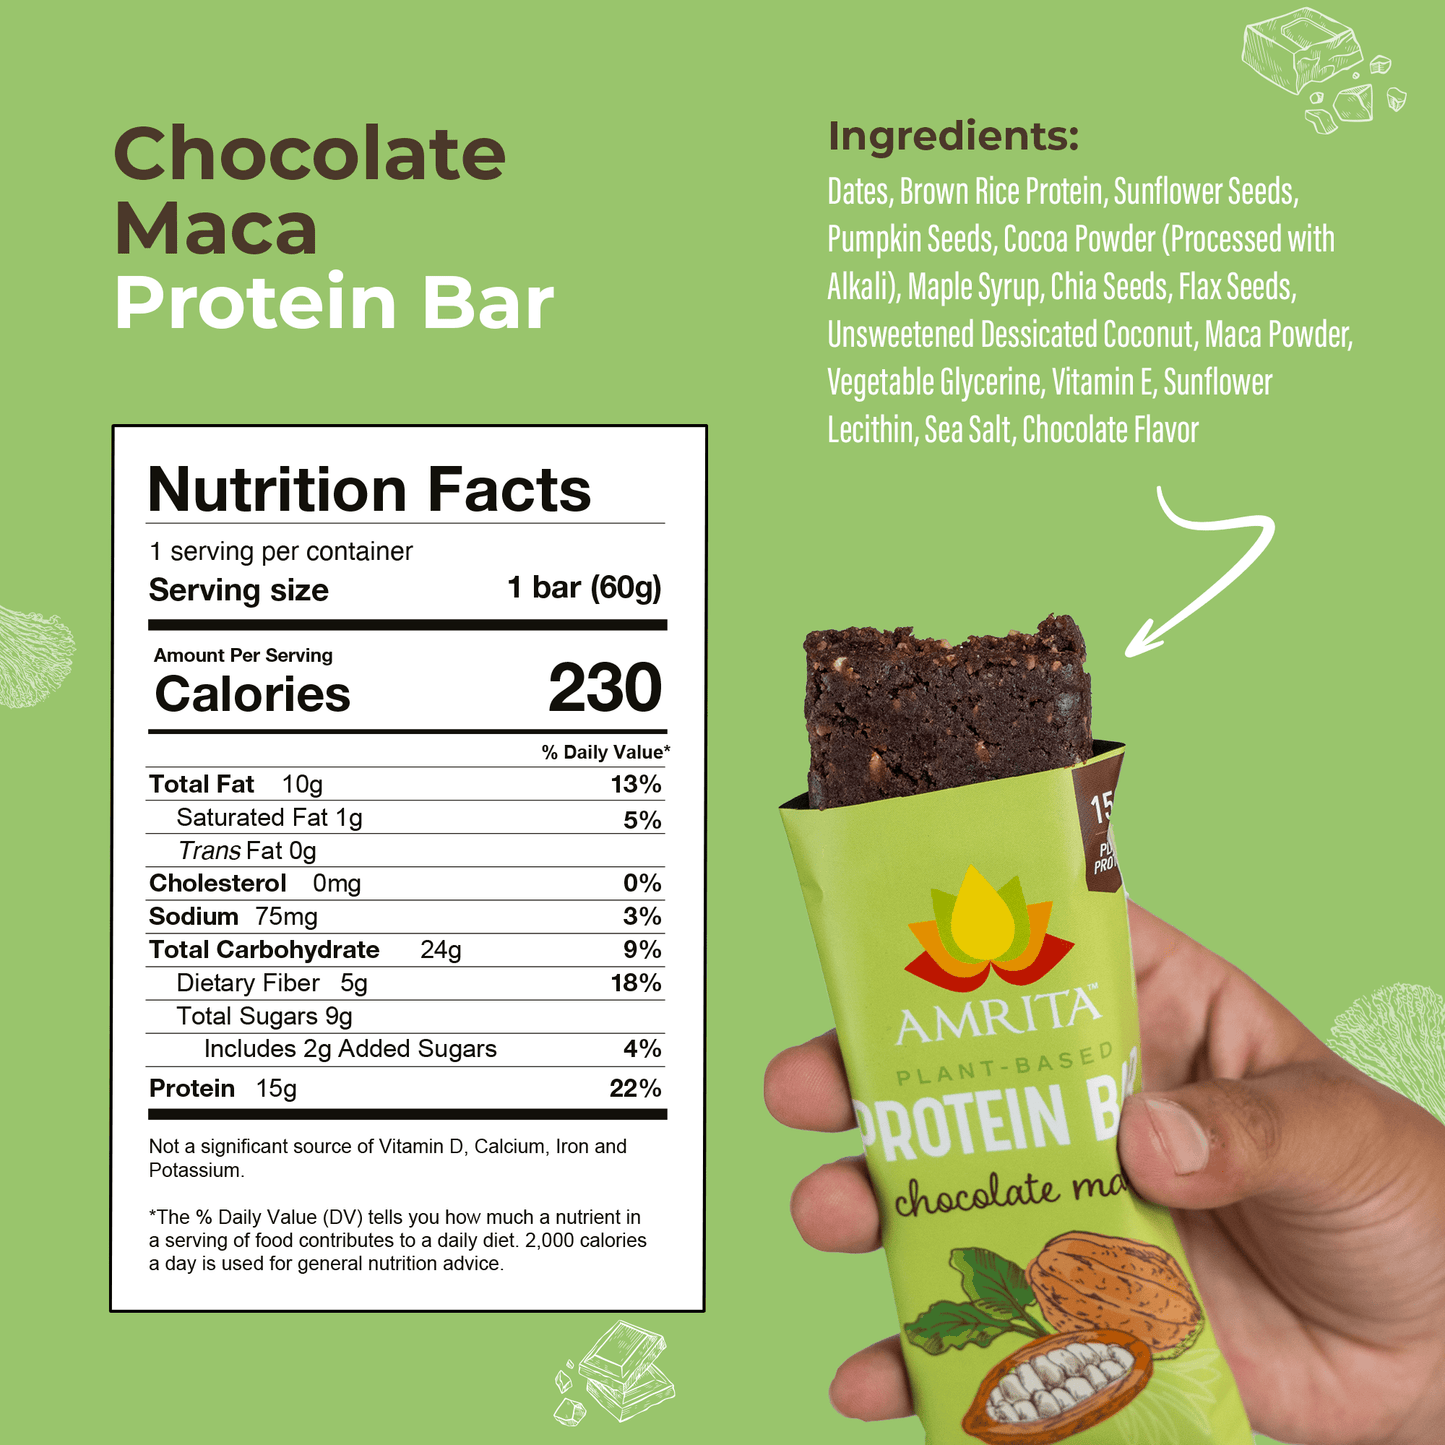 Chocolate Maca High Protein Bars Ingredients - Dates, brown rice protein, suflower seeds, pumpikin seeds, cocoa powder, maple syrup, chia seeds, flax seeds, unsweetened dessicated coconut, maca powder, vegetable glycerine, vitamin E, sunflower lecithin, sea salt, chocolate flavor